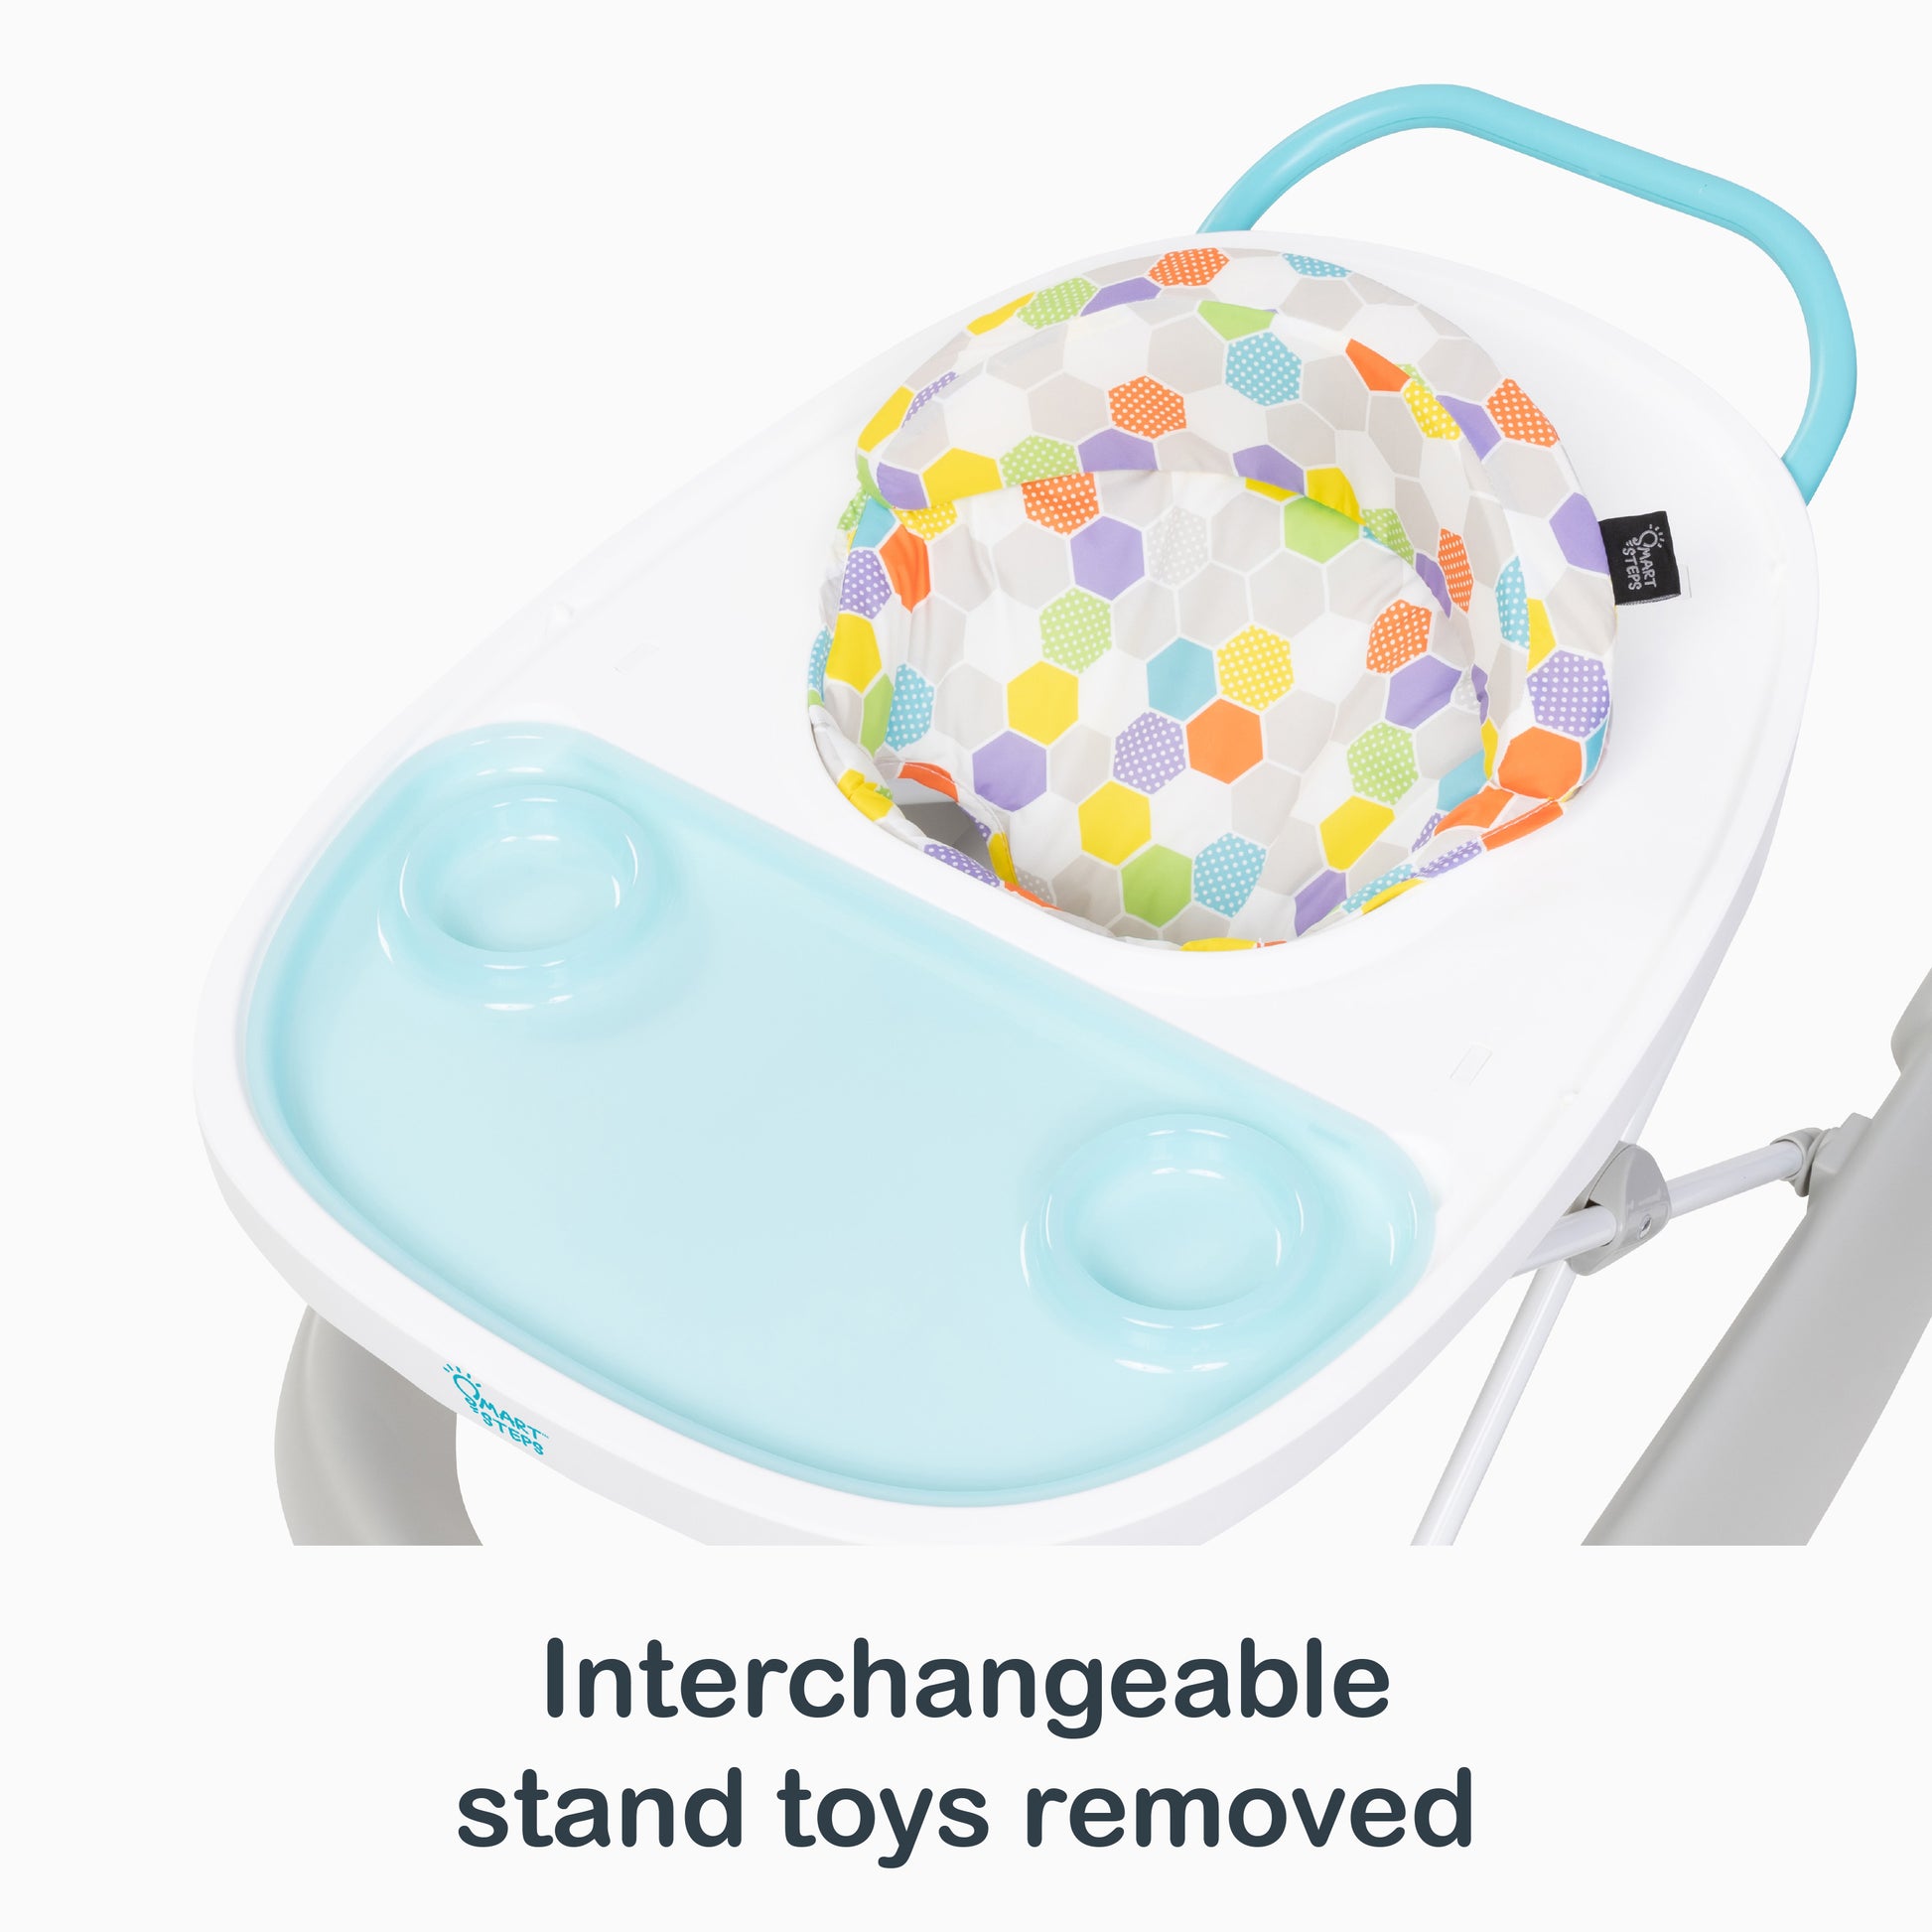 Interchangeable stand toys removed of the Smart Steps Dine N’ Play 3-in-1 Feeding Walker